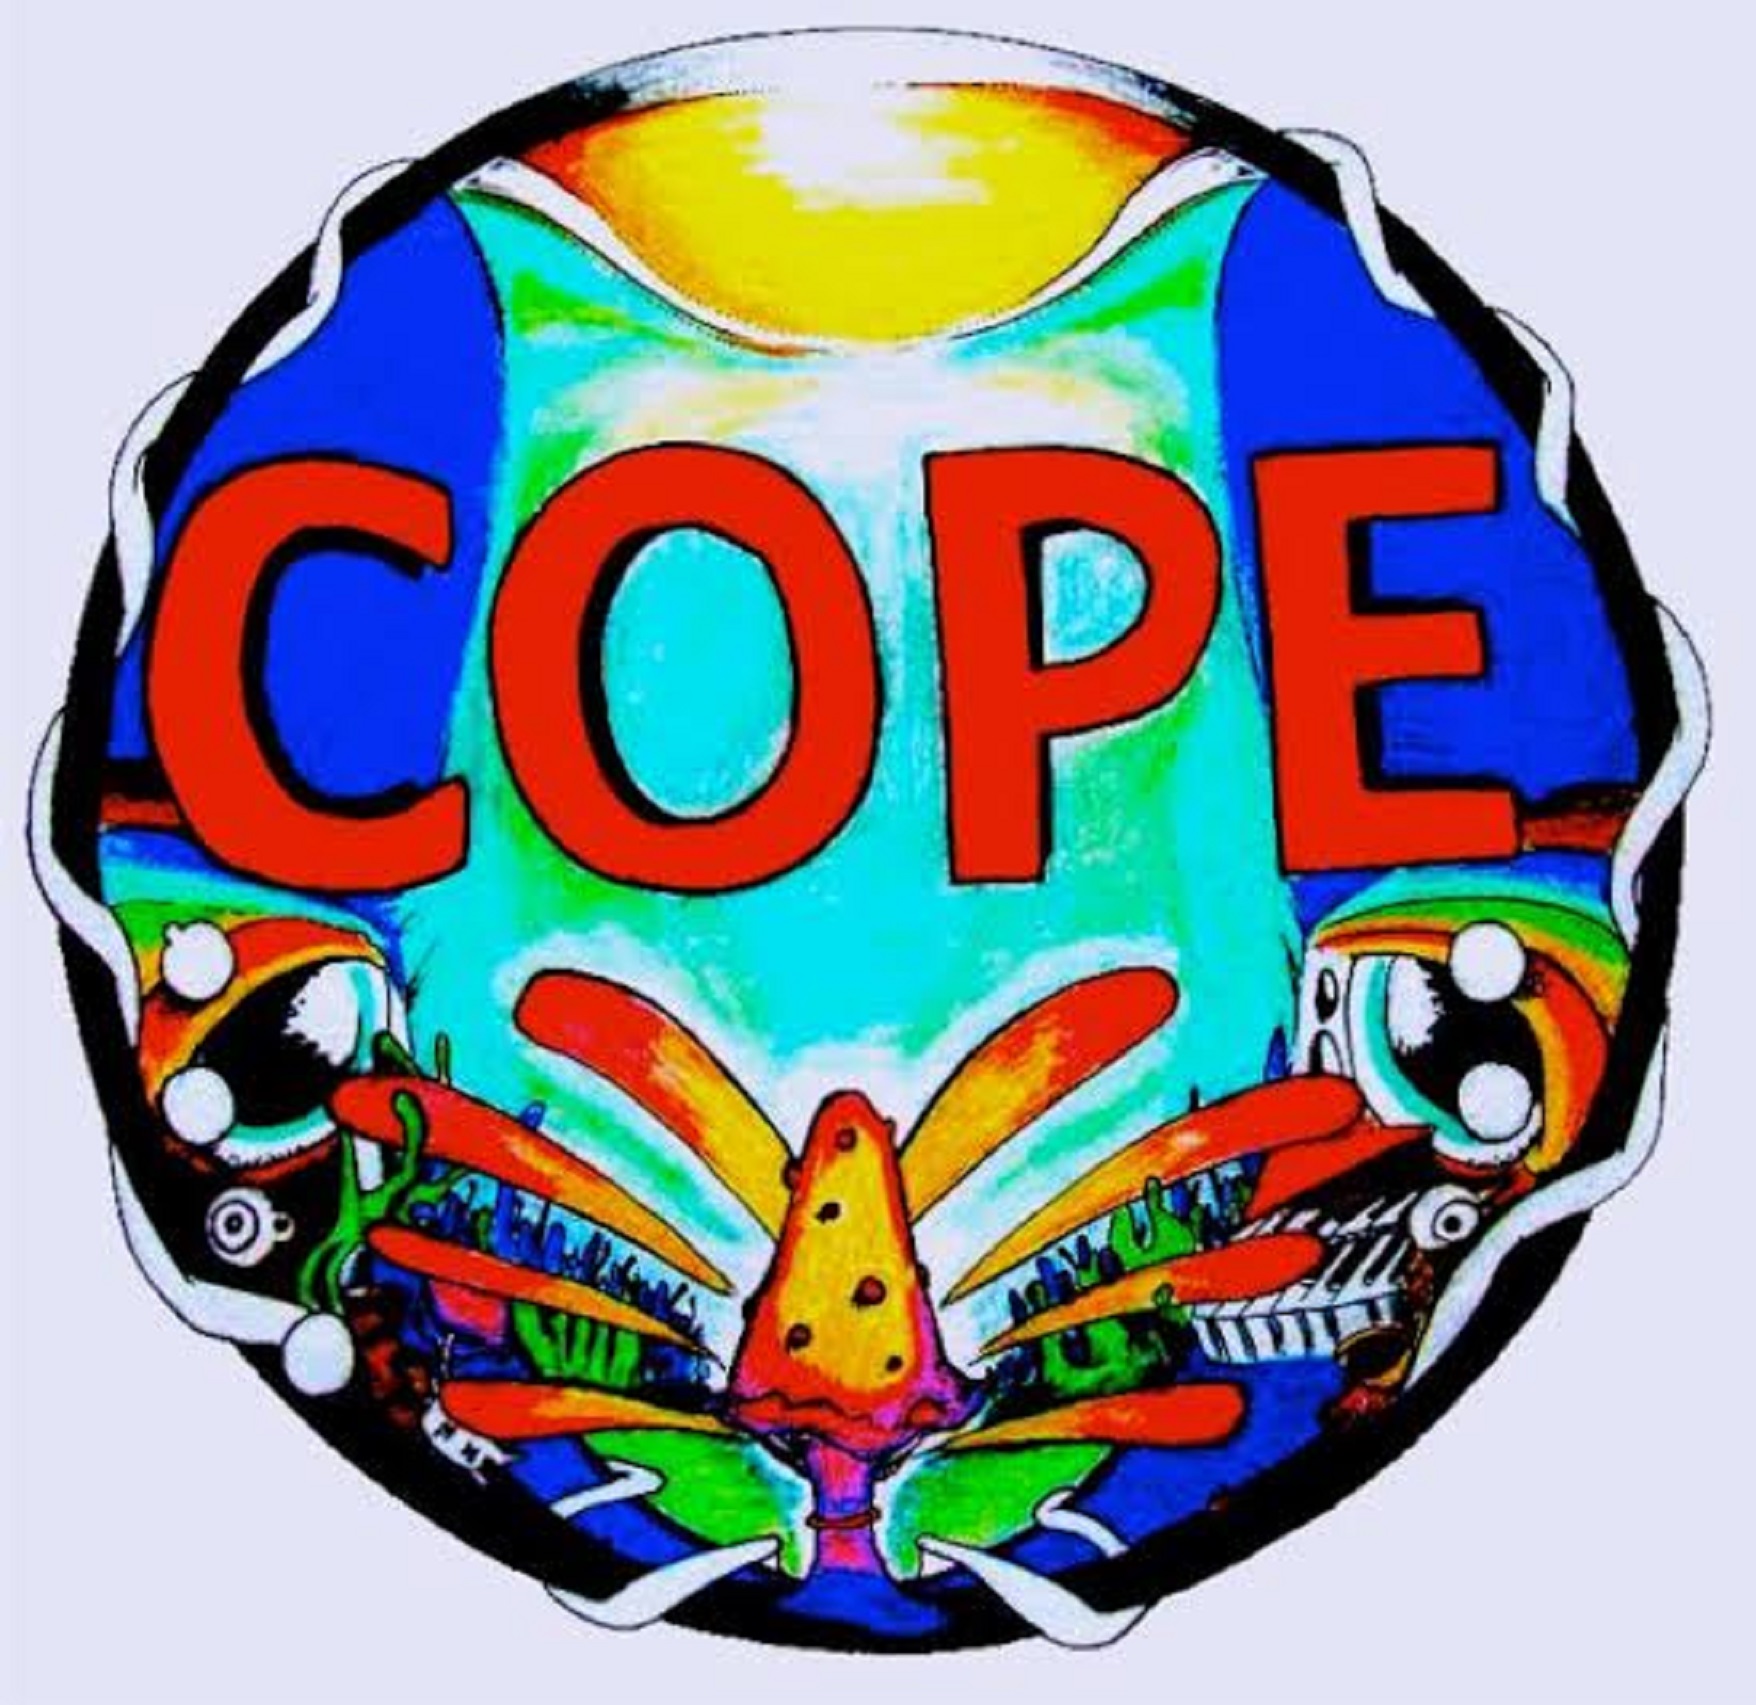 Grateful Web Interview with Cope